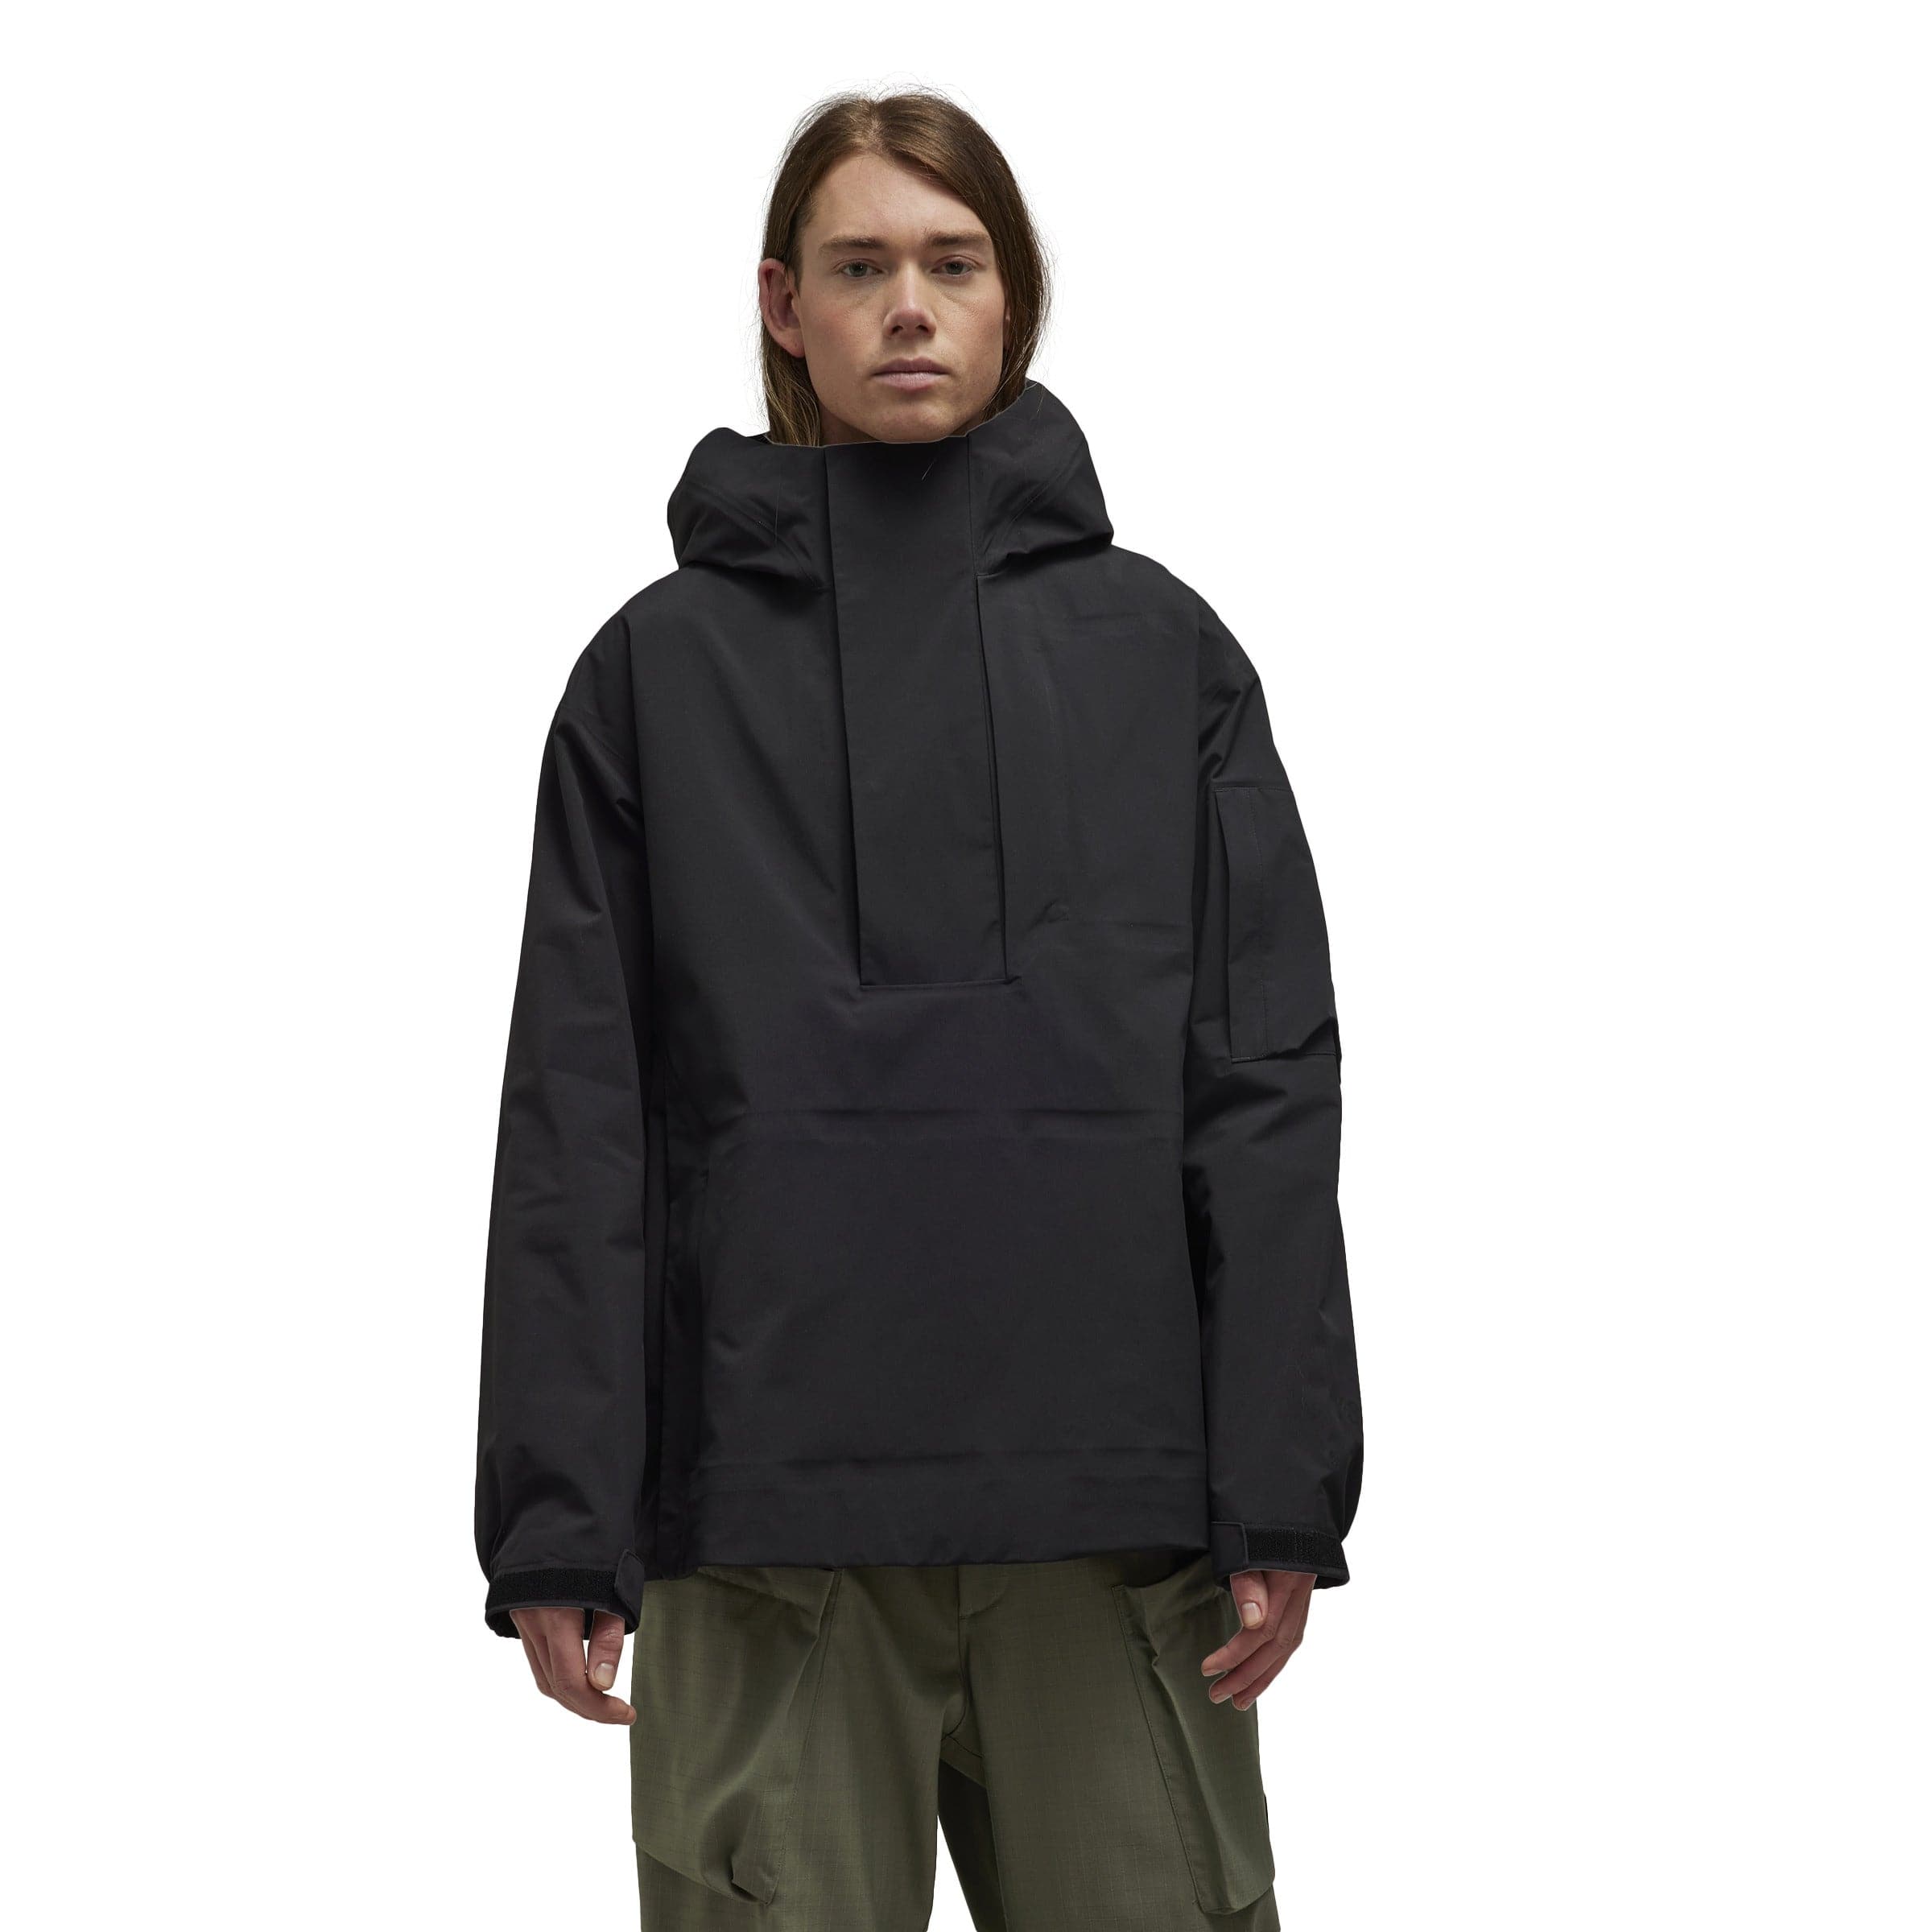 GORE-TEX HARD SHELL PULLOVER